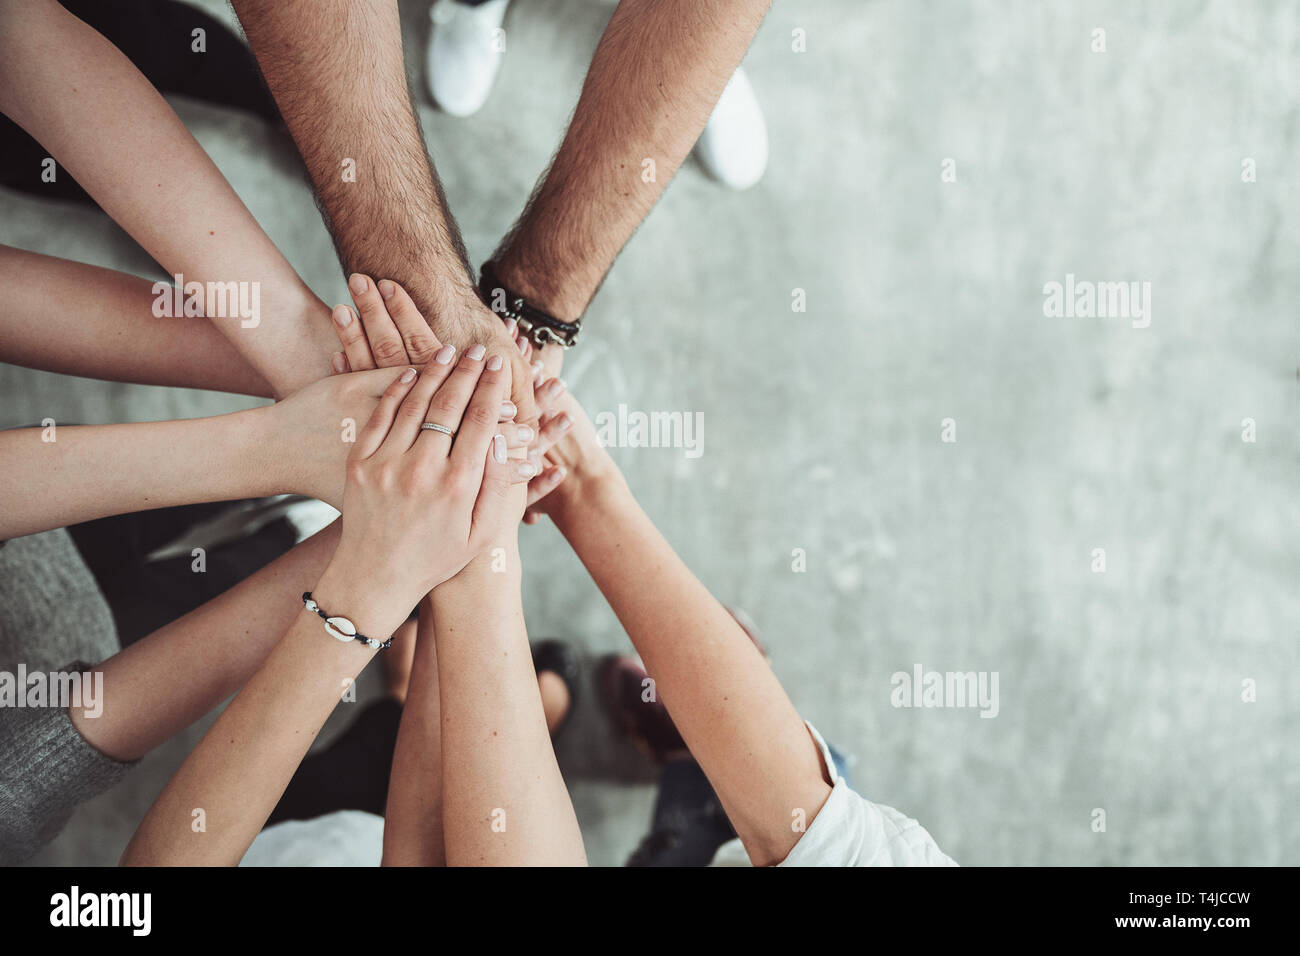 Teamwork, unity concept, group of friends put their hands together with copy space Stock Photo